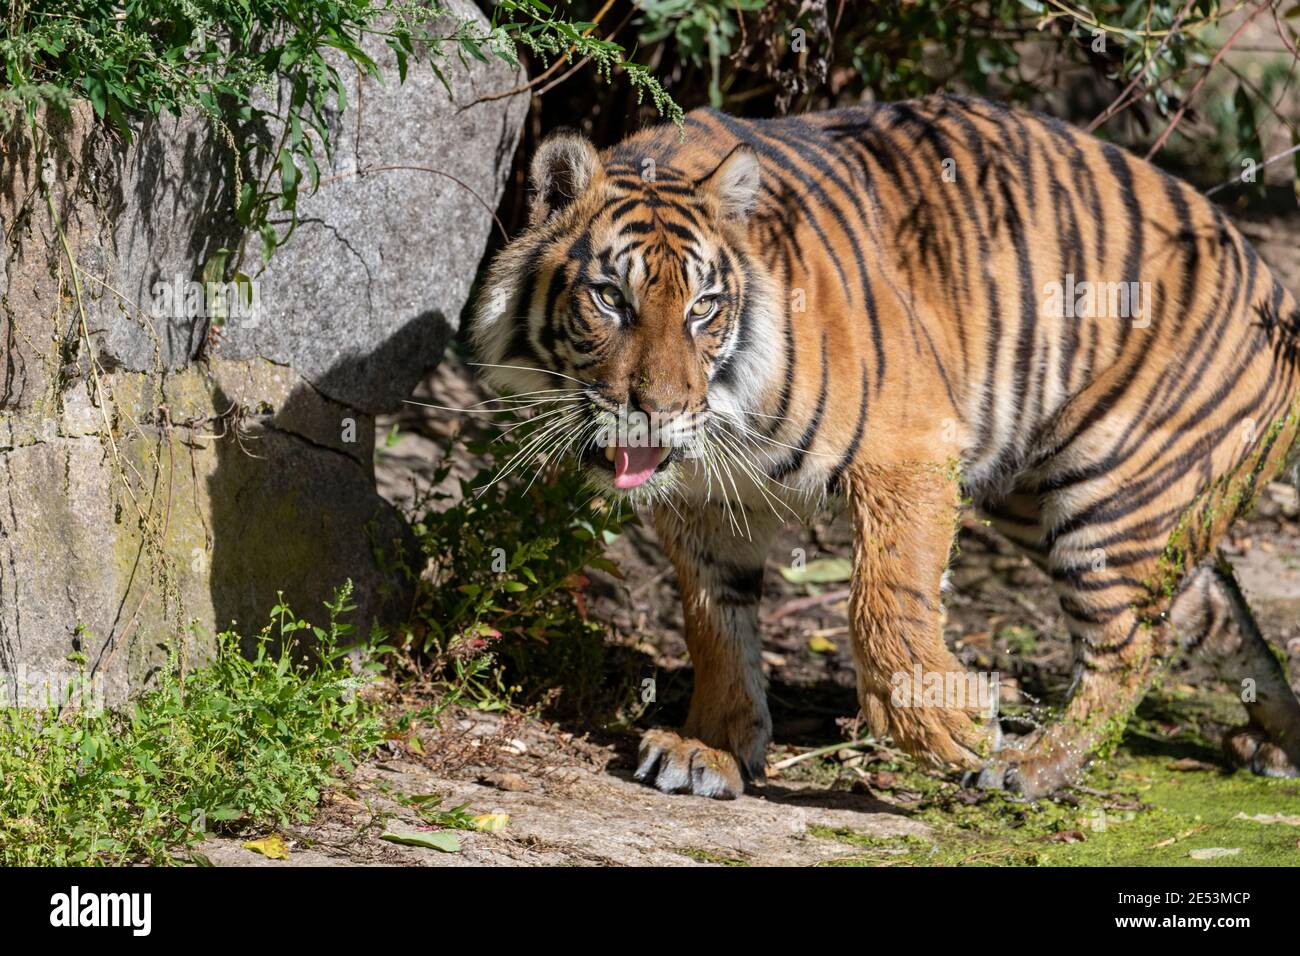 Tiger with water lentils on its mouth chuffing and moving while in the bright sun Stock Photo